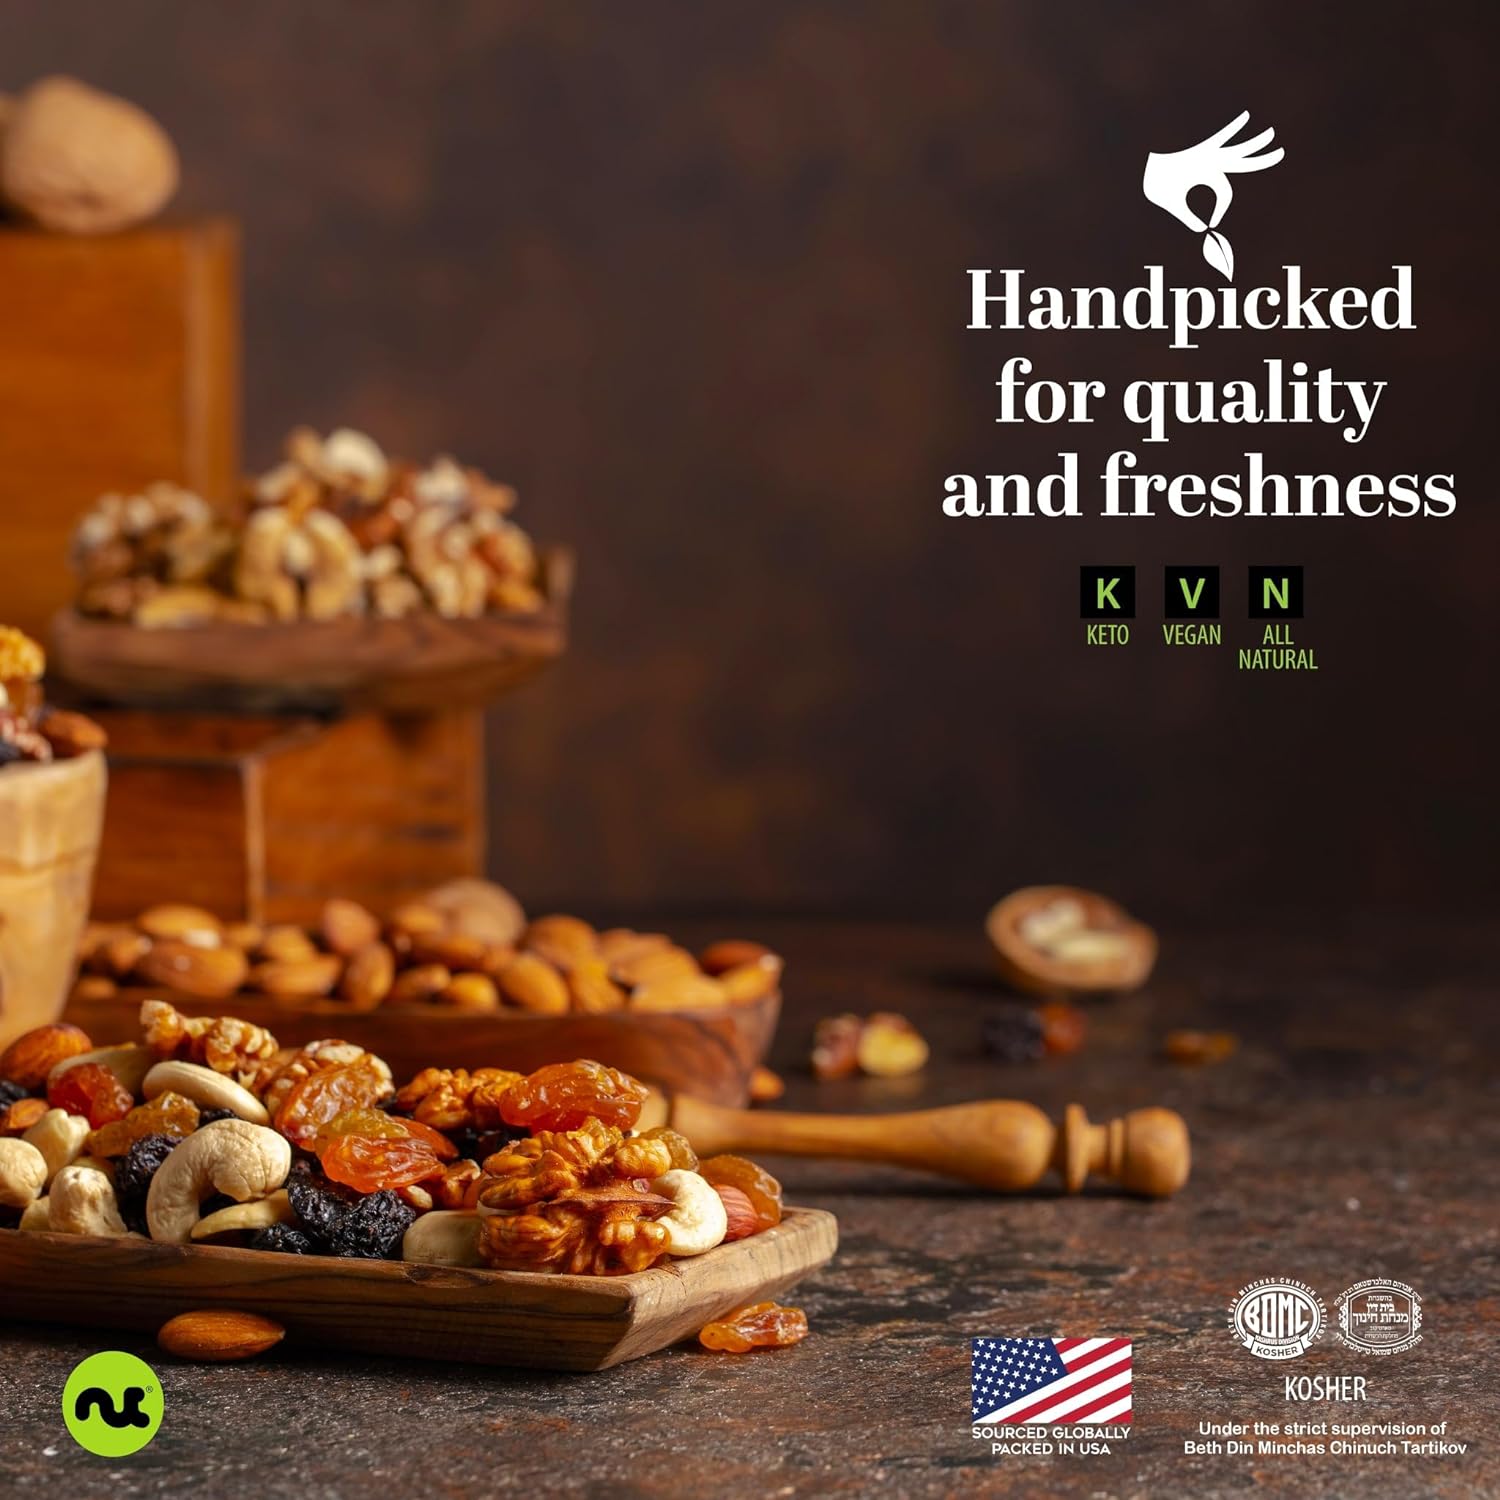 Nut Cravings - Roasted & Salted Mixed Nuts - Brazil, Pecan, Almond, Hazelnut, Cashew (80oz - 5 LB) Packed Fresh in Resealable Bag - Healthy Protein Food, All Natural, Keto Friendly, Vegan, Kosher : Grocery & Gourmet Food